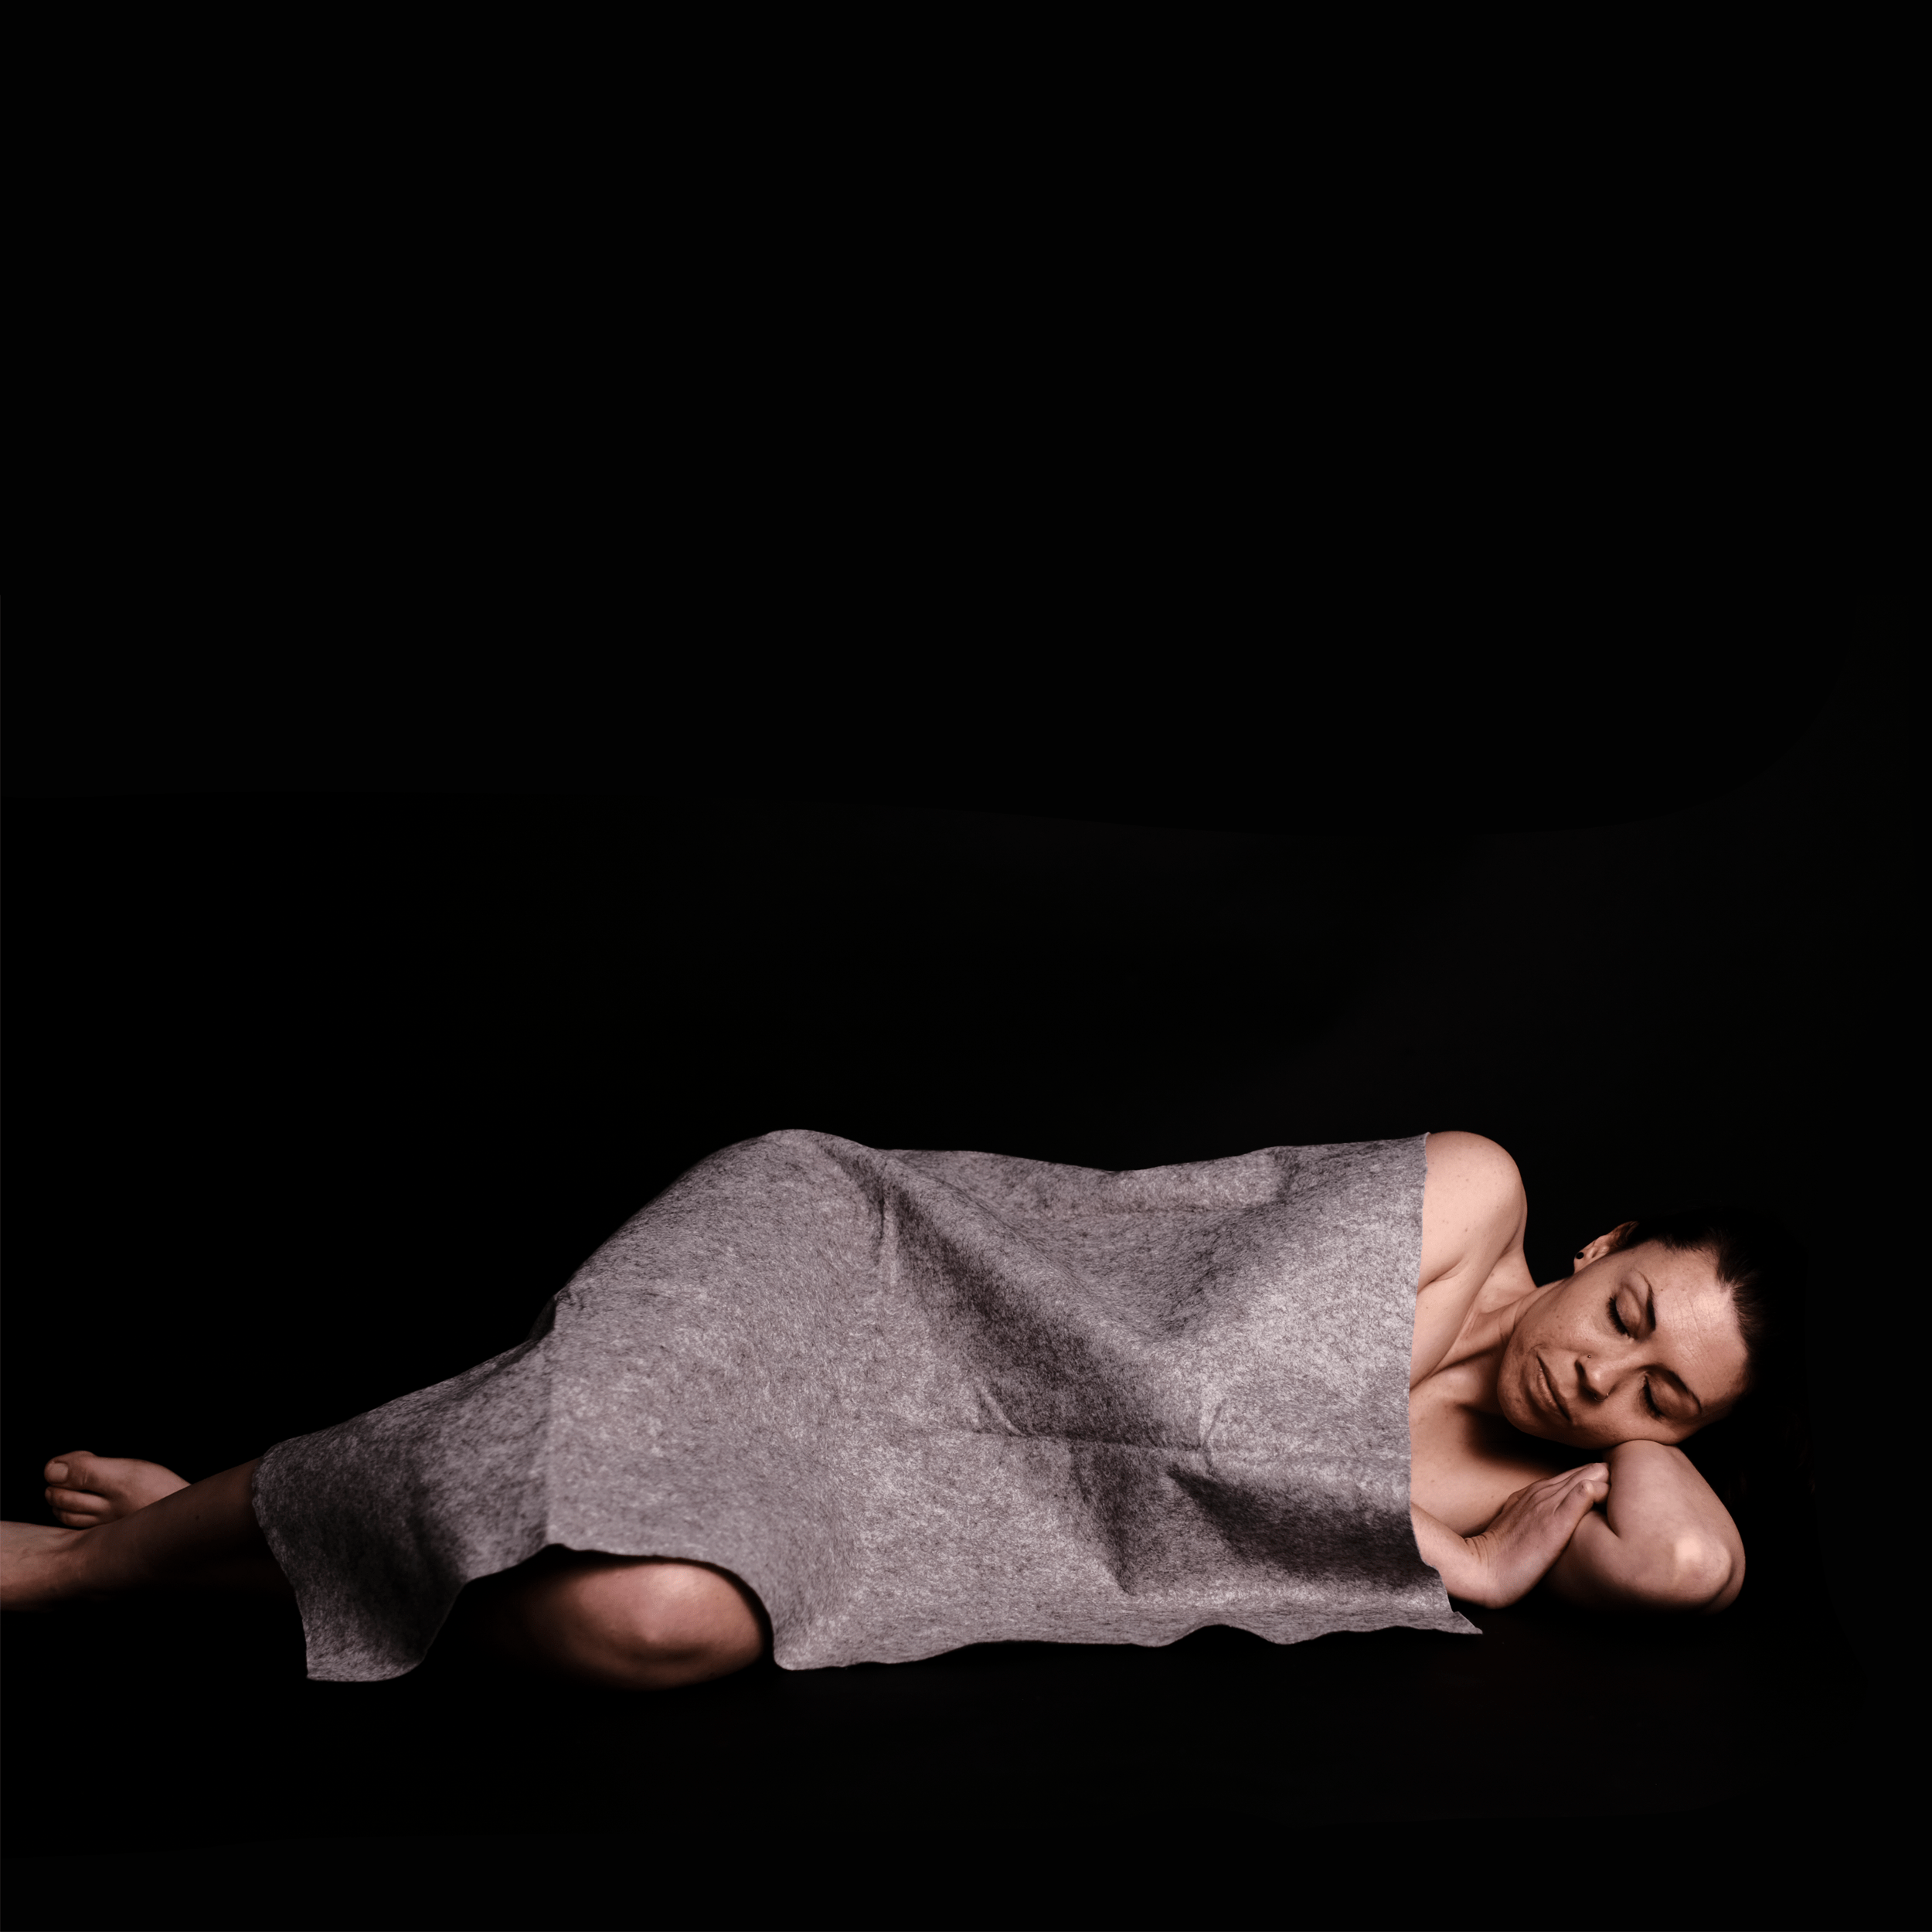 Photograph by Layne Howlett and Alice Collins showing a woman lyind down with a felt sheet covering her.